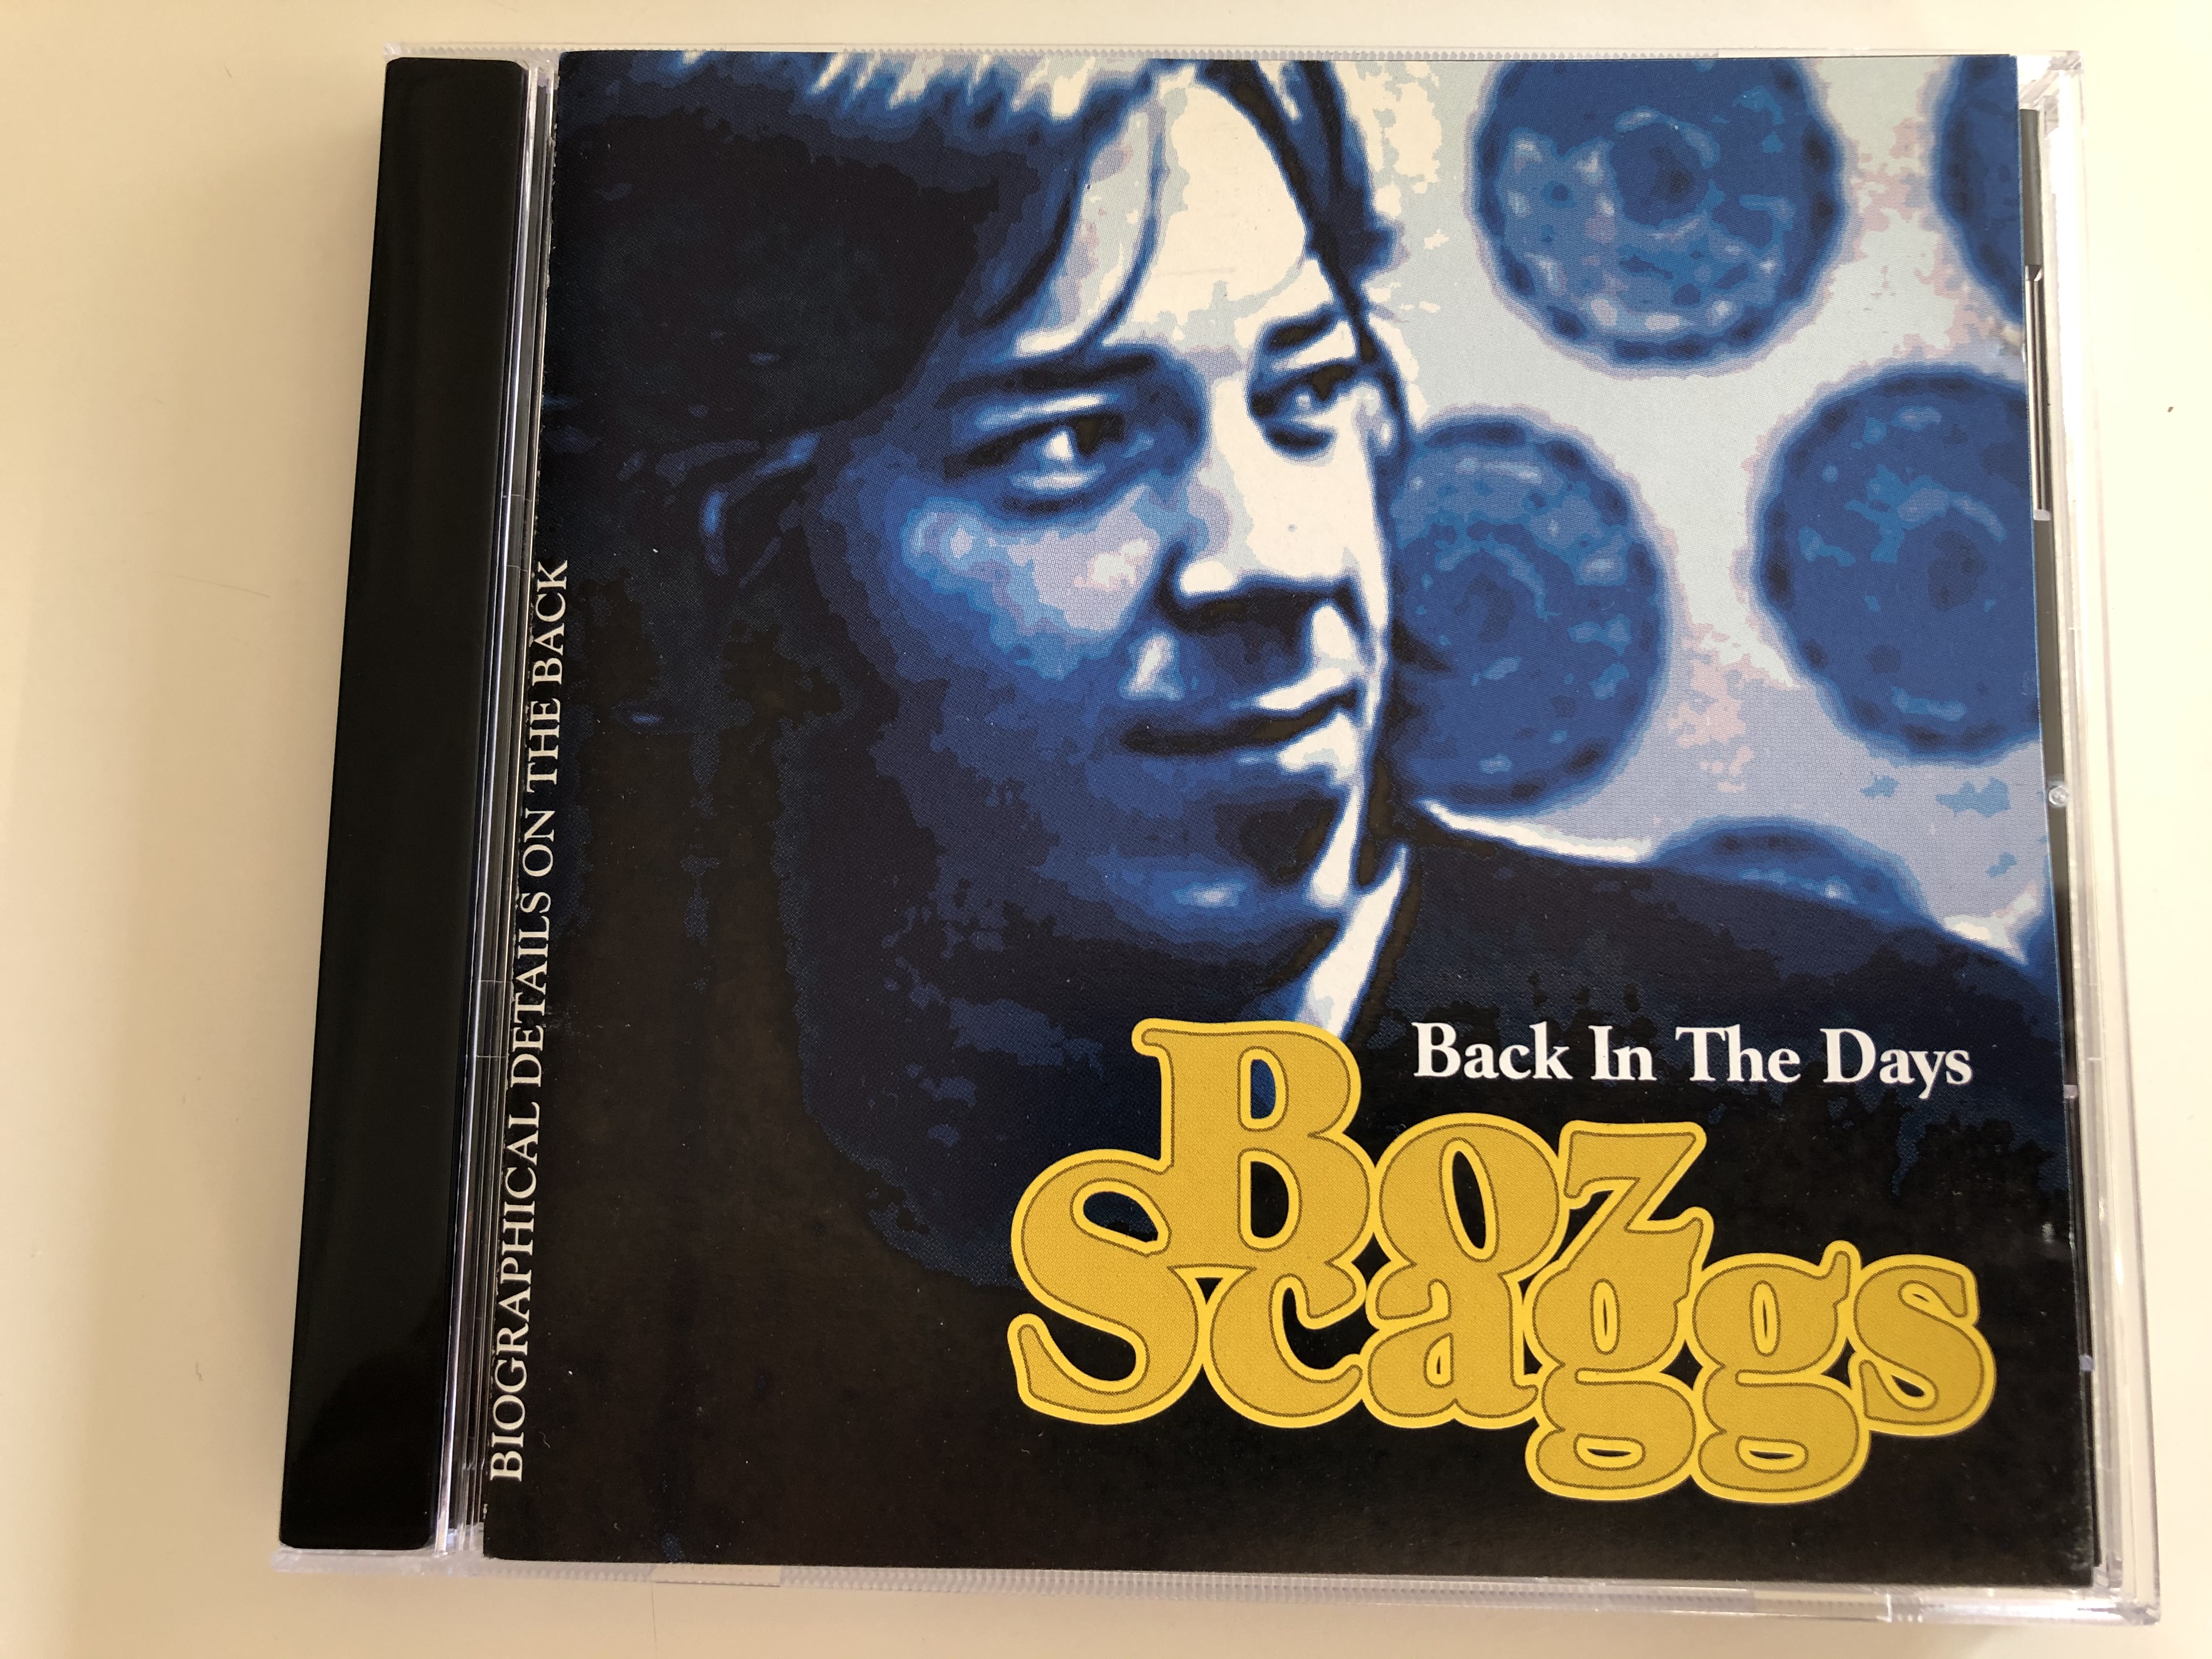 boz-scaggs-back-in-the-days-biographical-details-on-the-back-success-audio-cd-1996-16294cd-1-.jpg